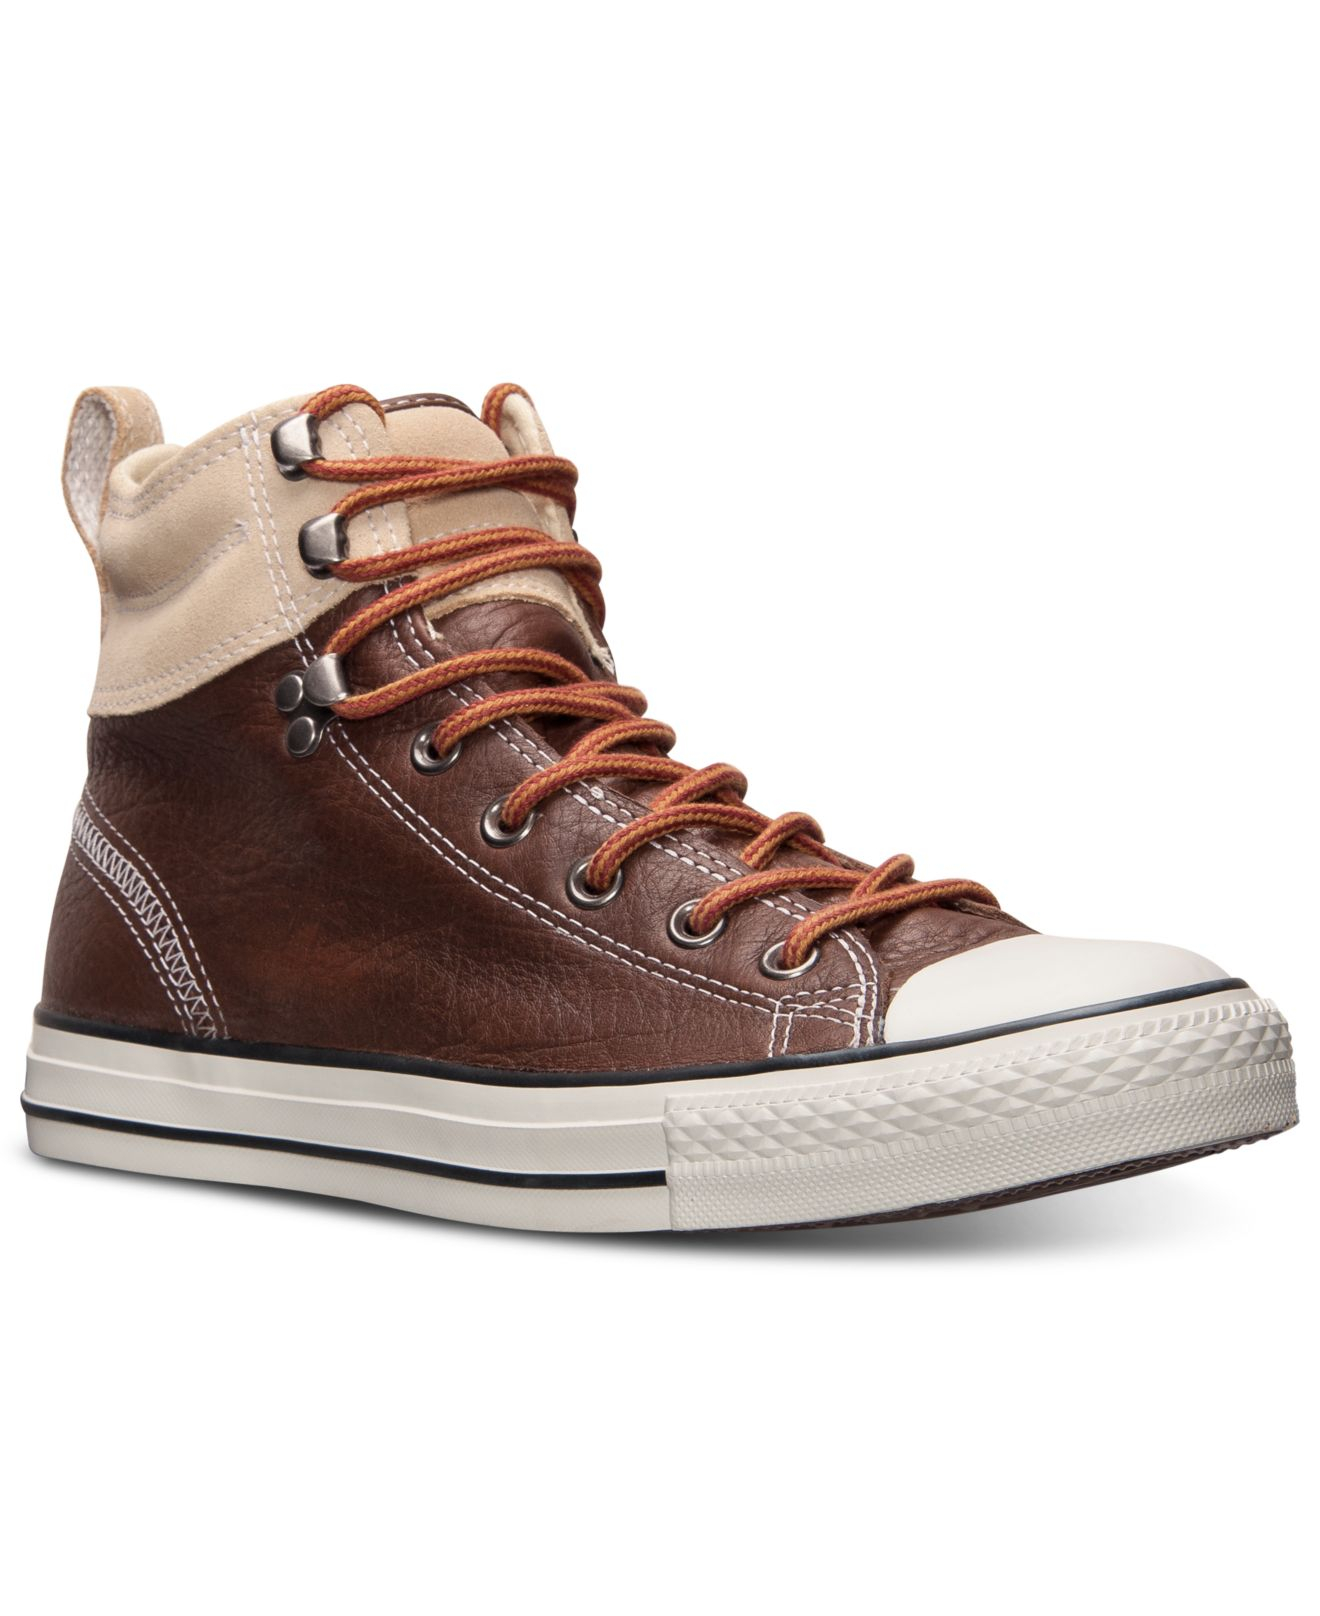 Lyst - Converse Men's Chuck Taylor All Star Hiker 2 Sneakers From ...